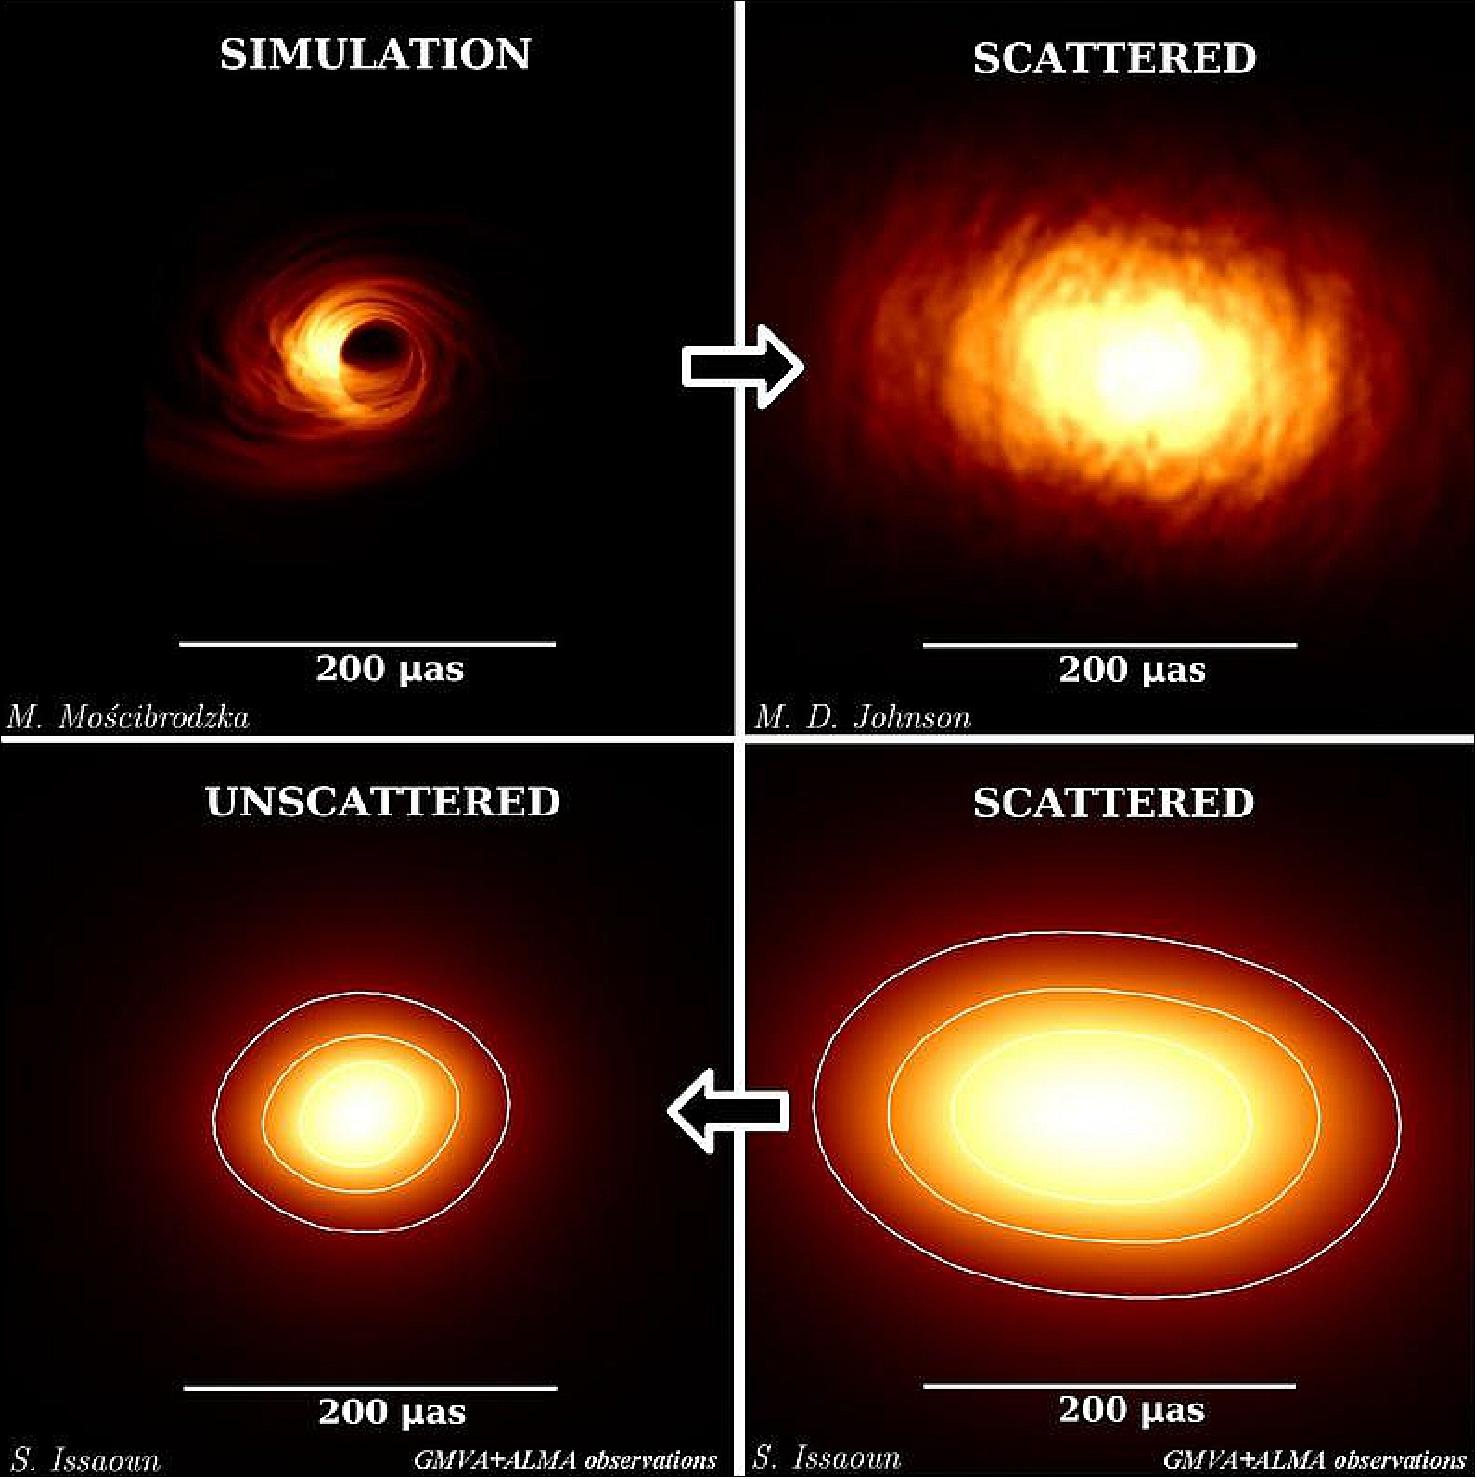 Figure 106: Sgr A* at 86 GHz: simulation (top left), added effects of scattering (top right), scattered image from observations (bottom right), unscattered image, after removing the effects of scattering in the line of sight (bottom left), image credit: S. Issaoun, M. Mościbrodzka, Radboud University (Nijmegen, The Netherlangs) / M. D. Johnson, CfA